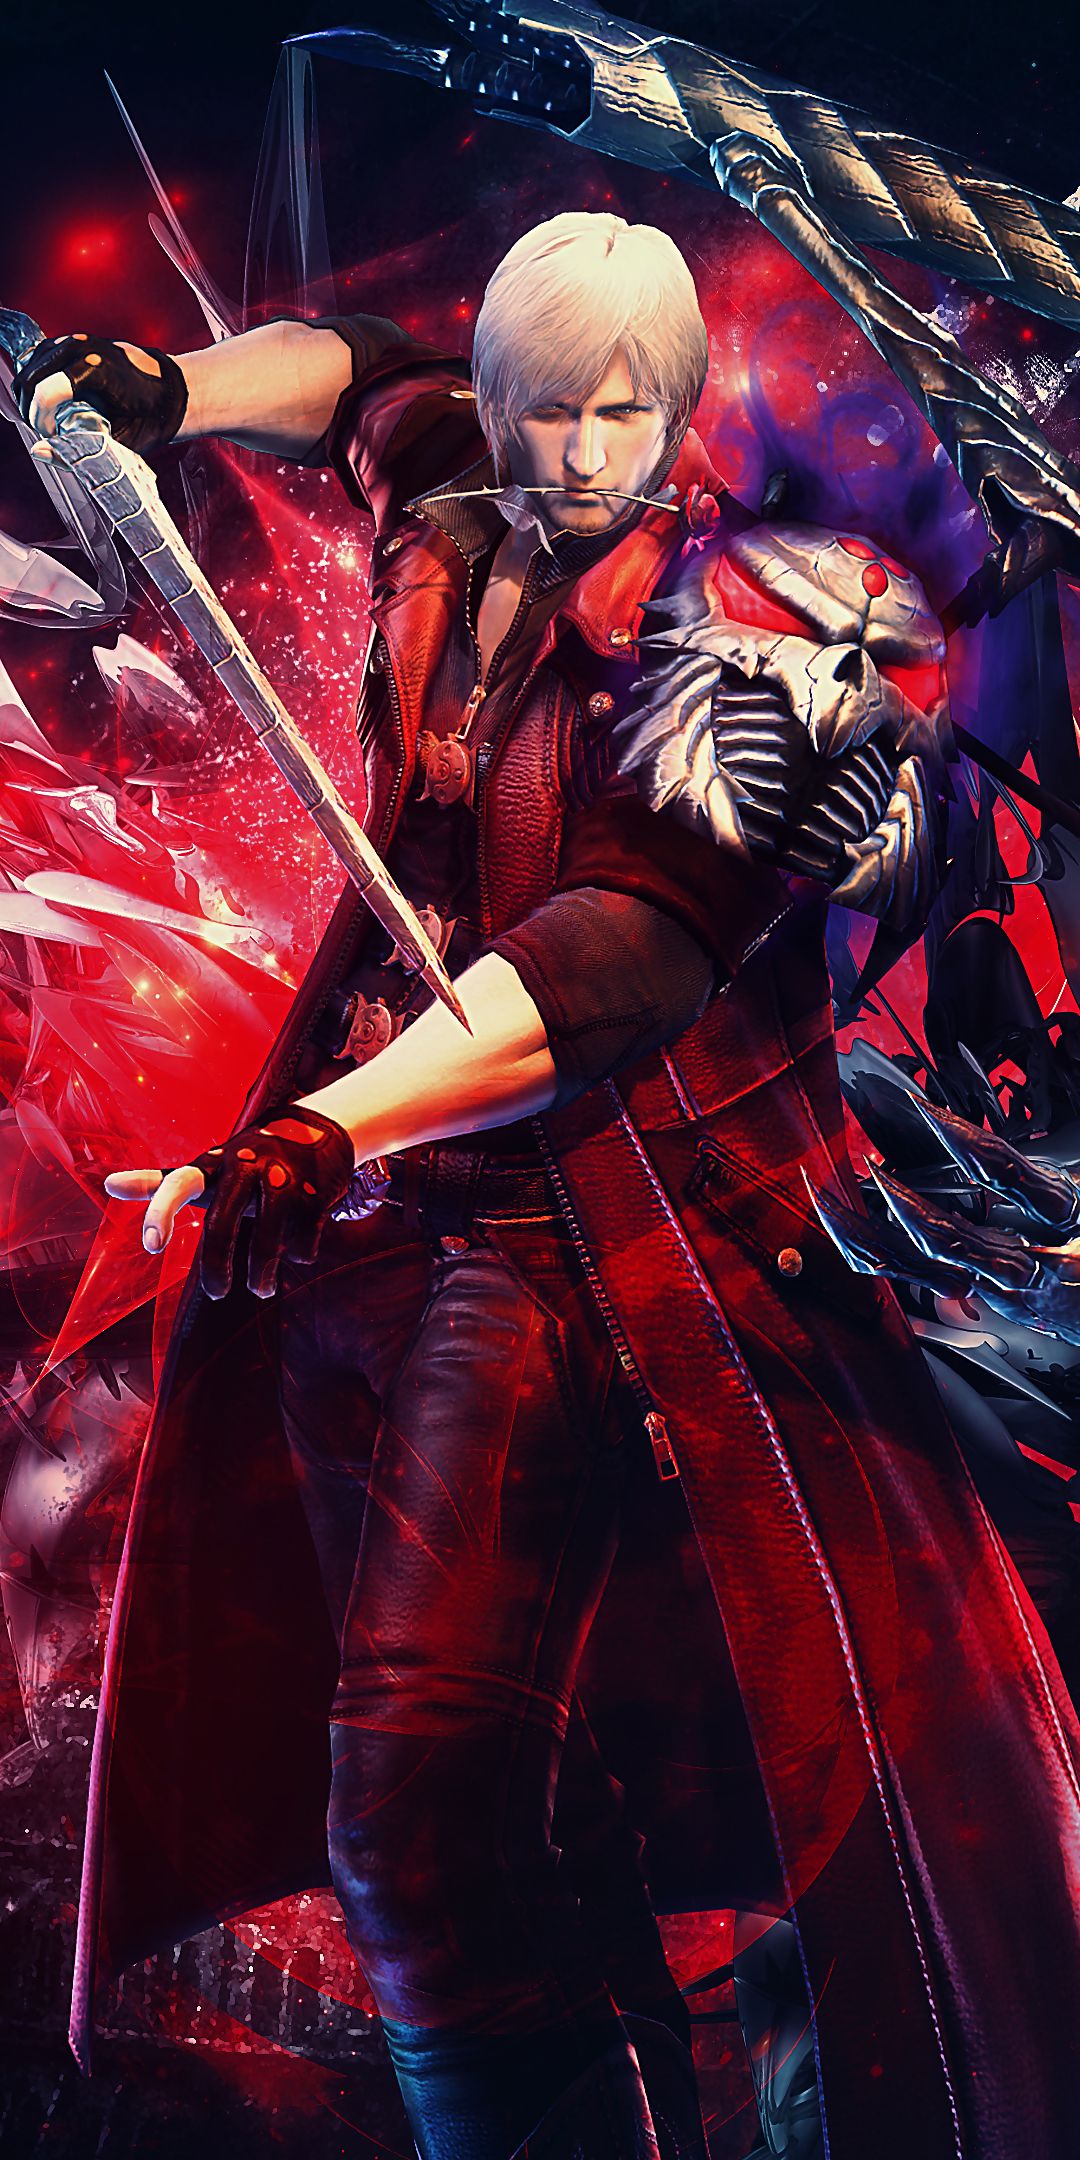 Handy-Wallpaper Devil May Cry, Computerspiele, Dante (Devil May Cry), Devil May Cry 4 kostenlos herunterladen.